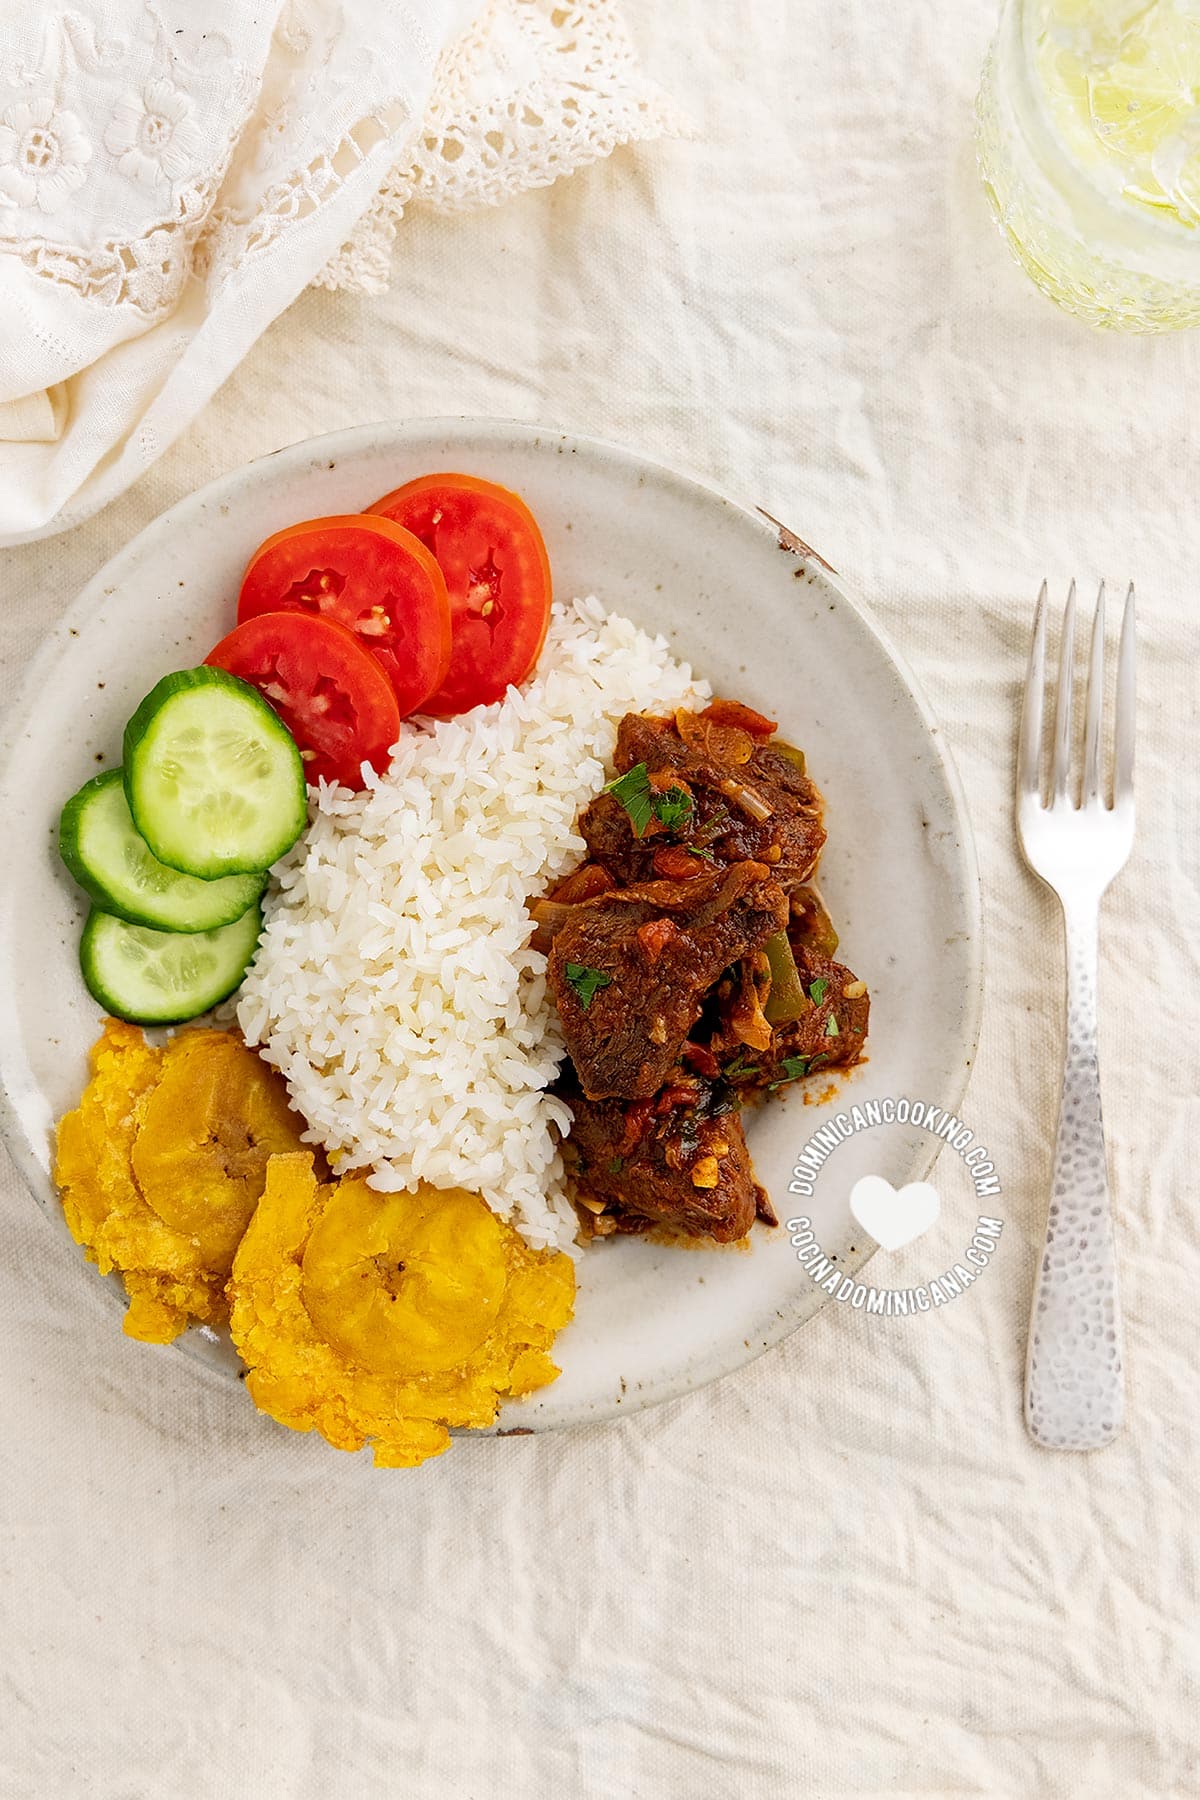 Carne de res guisada (dominican braised beef) served with to rice, tostones, and salad.